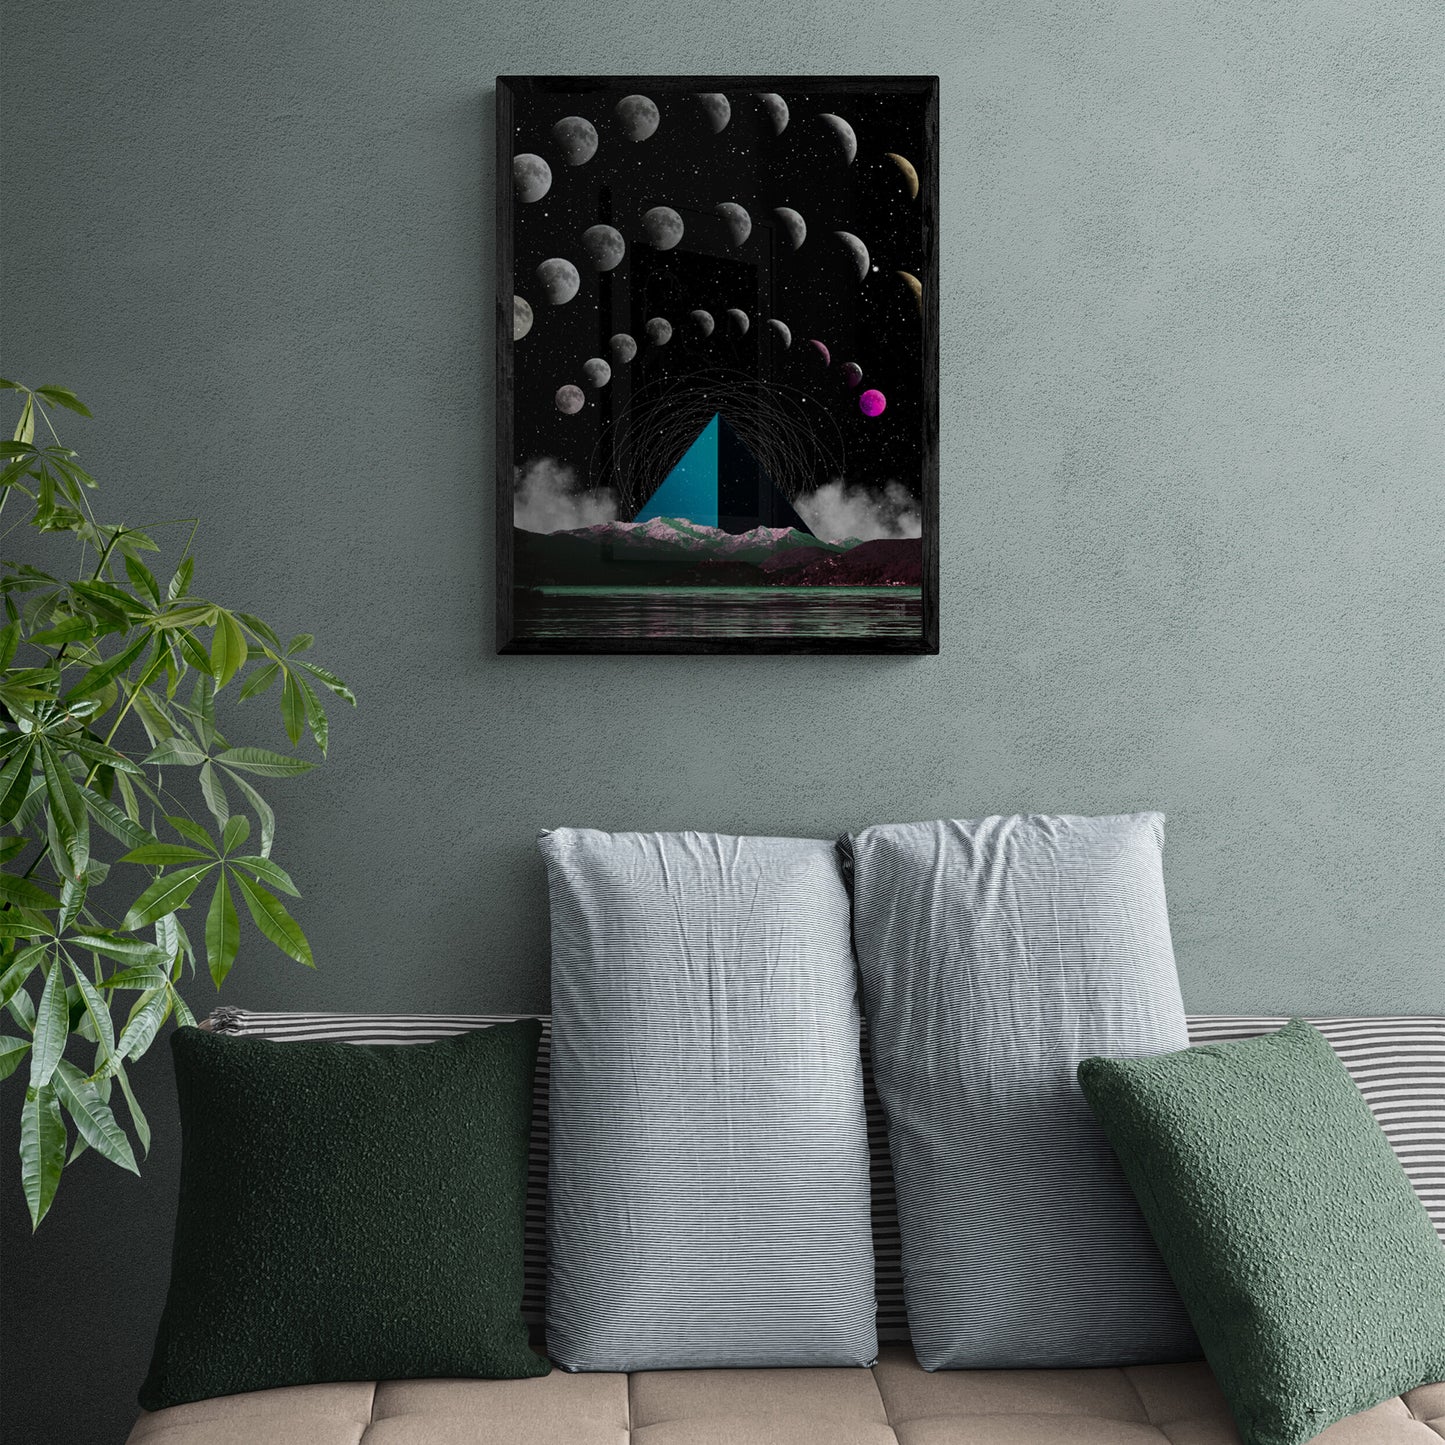 Tealscape Pyramid 18X24 Inch Poster Print for moon & pyramid fans, great gift for home decor and room design.